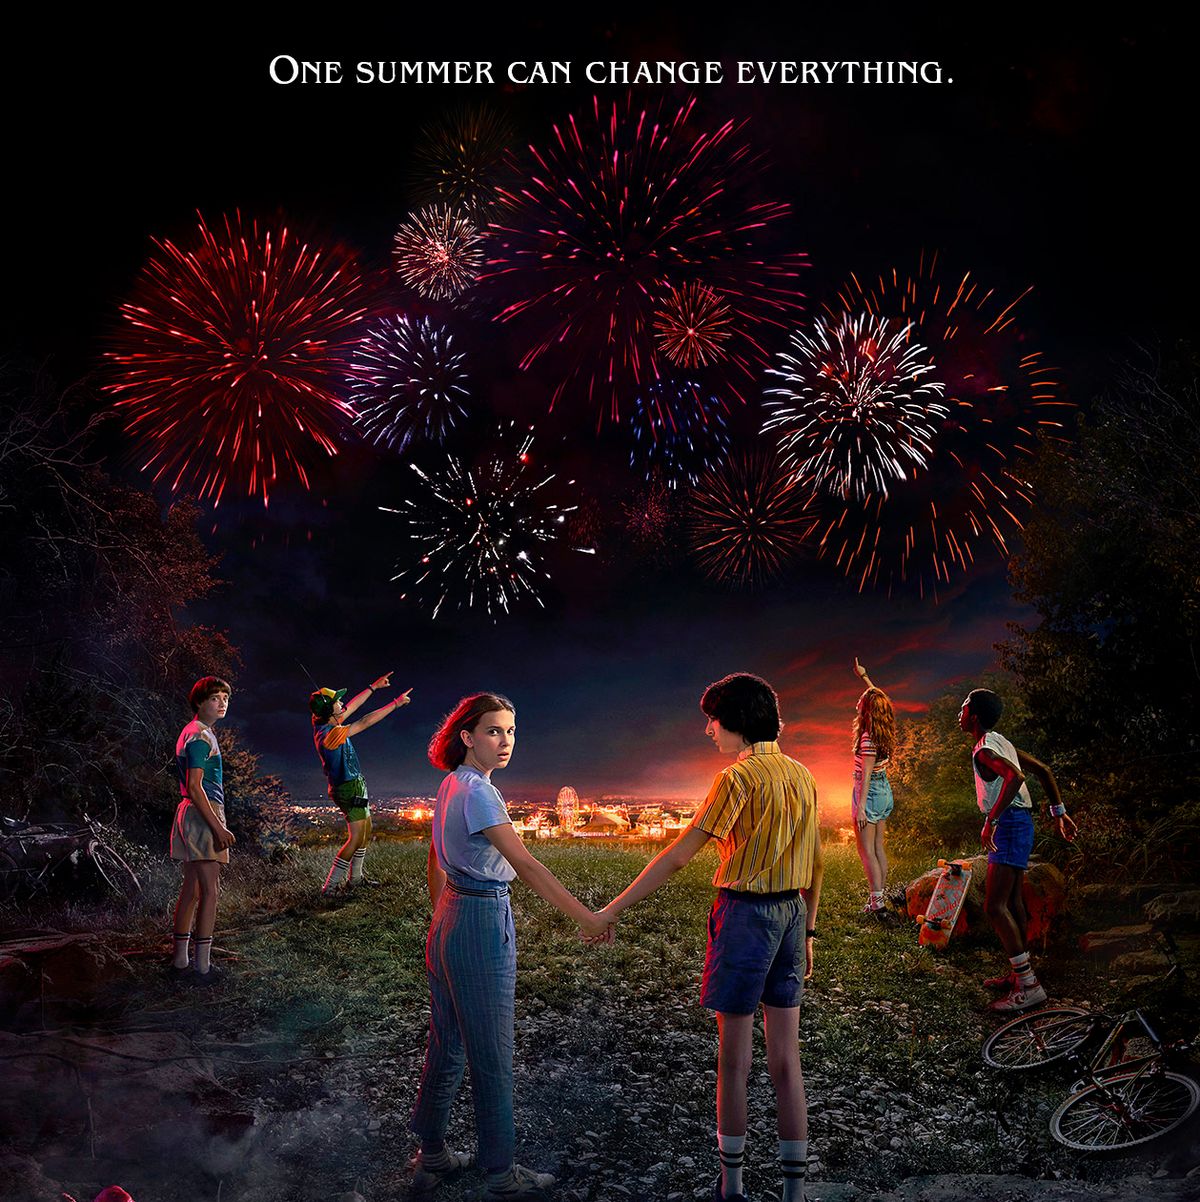 Stranger Things Season 3 Predictions: Everything We Know, and Want to Know